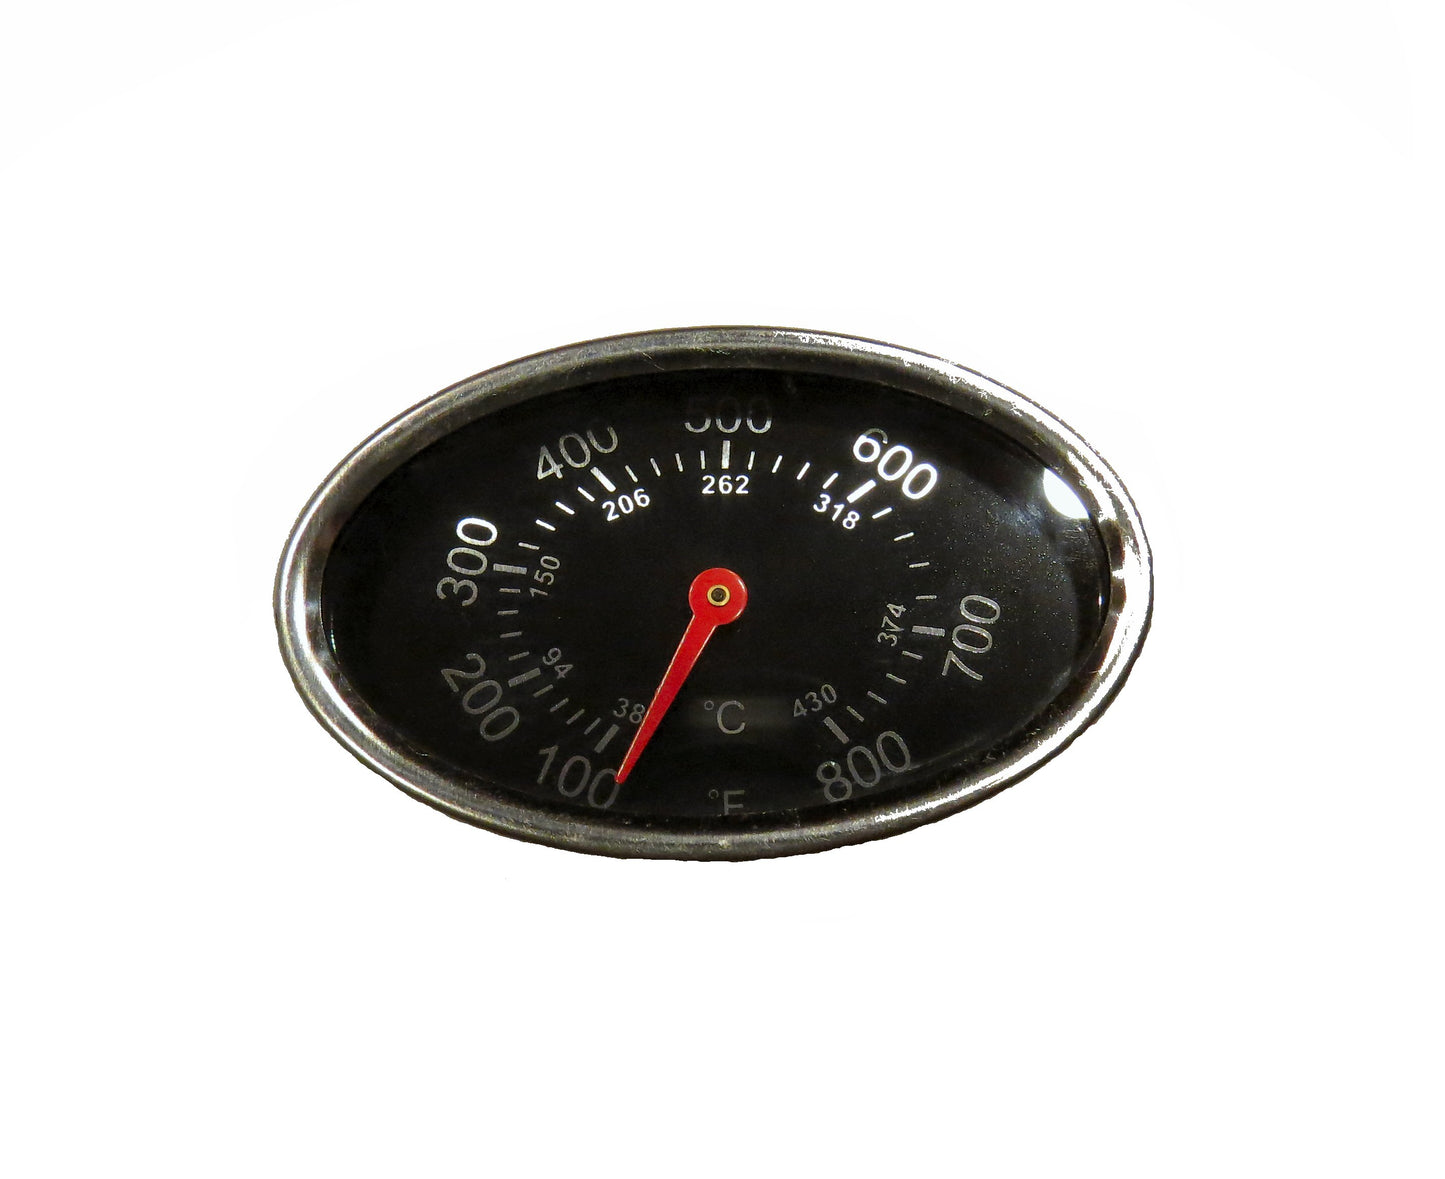 Door Thermometer for Wood Oven